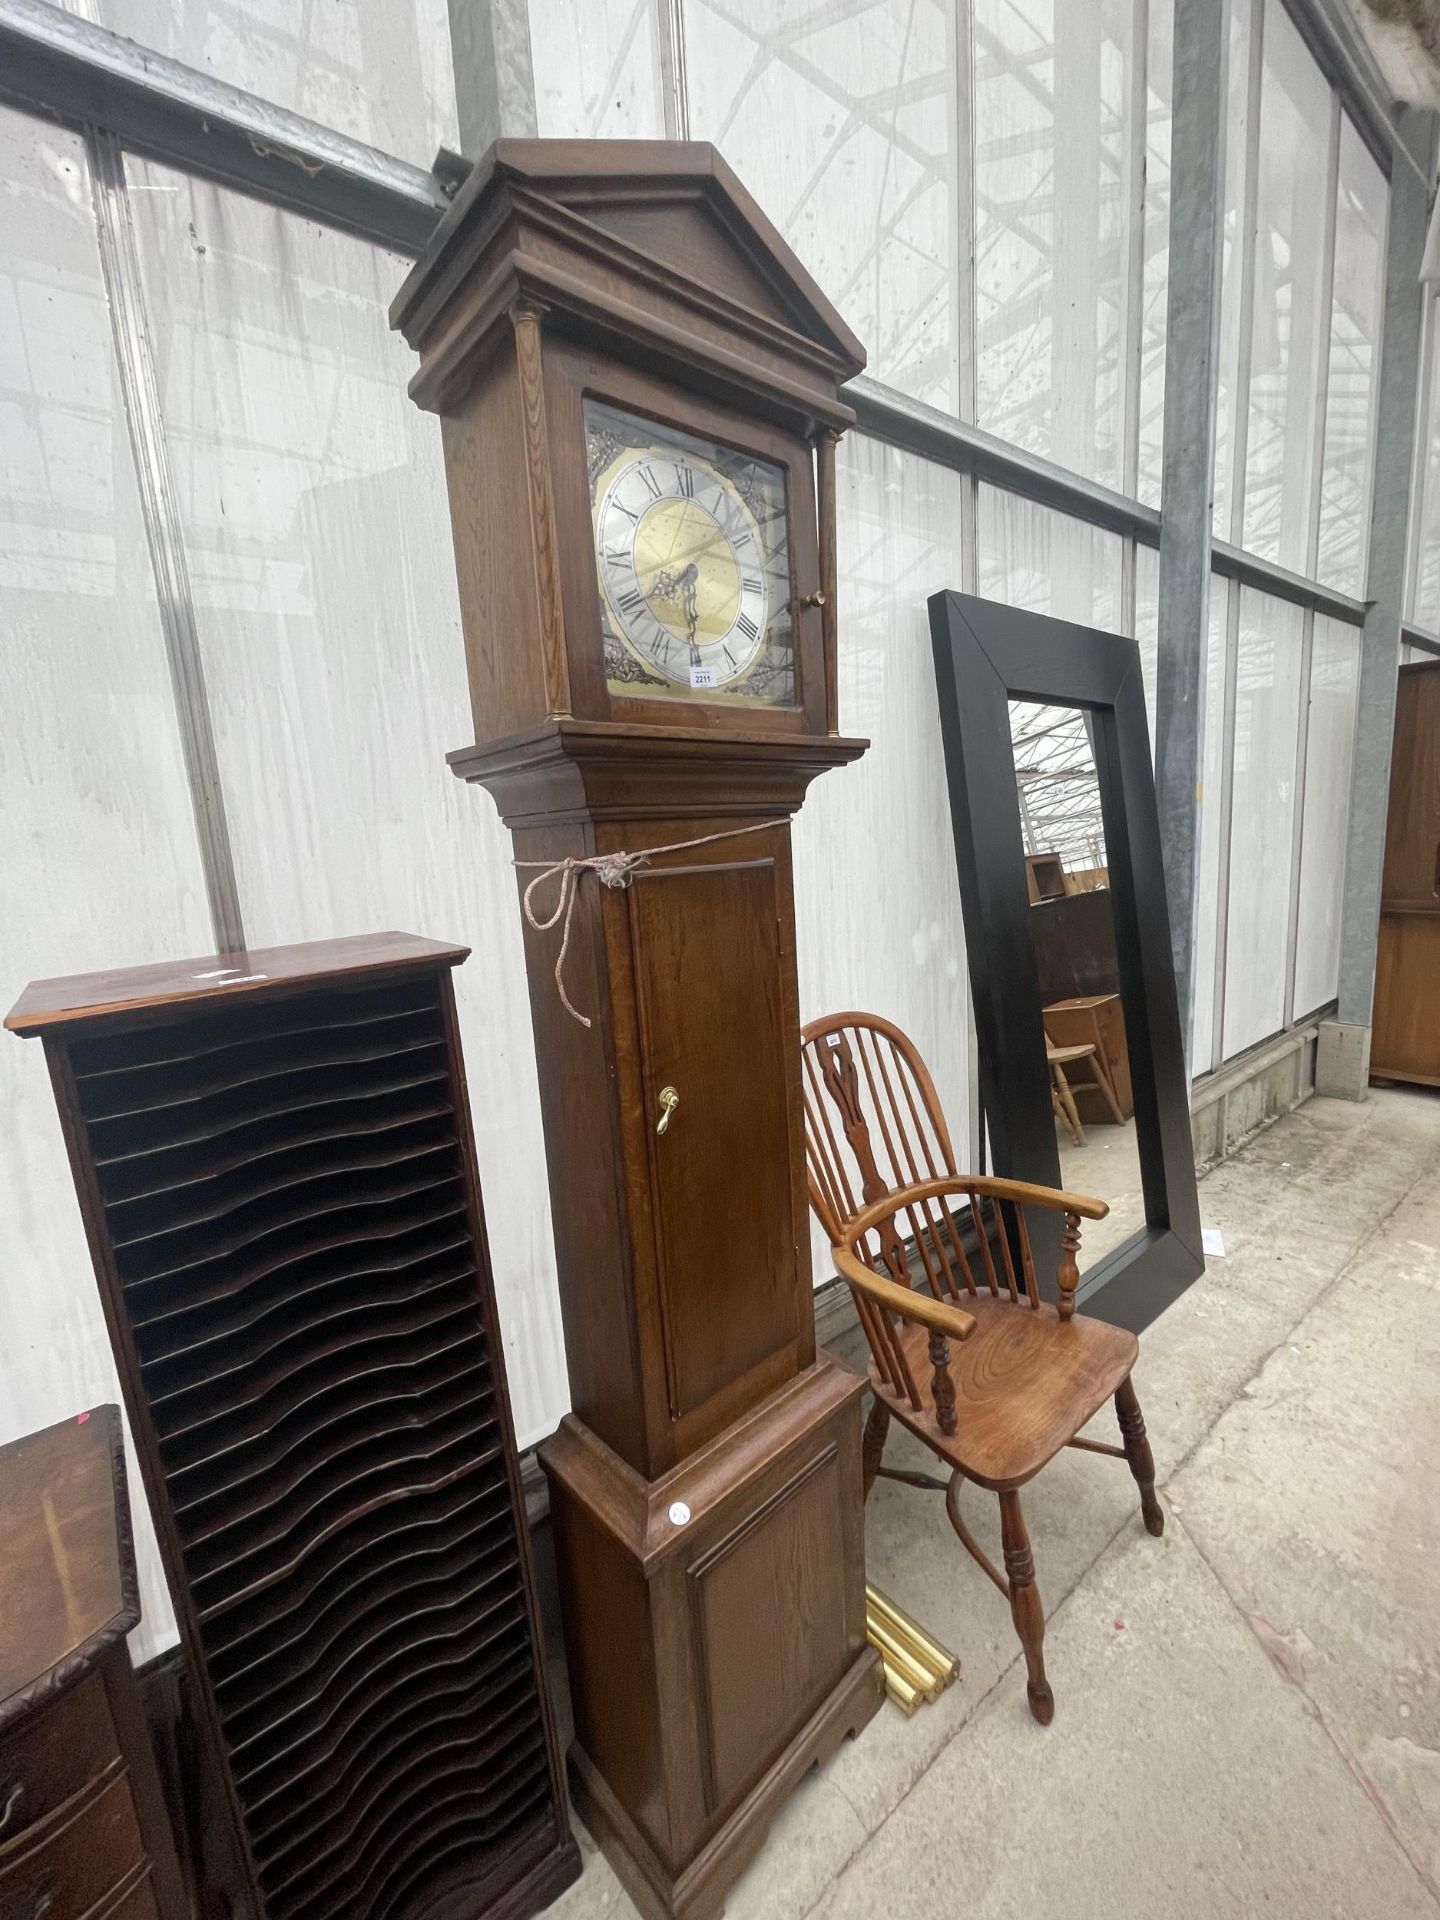 A REPRODUCTION OAK LONGCASE CLOCK WITH BRASS FACE AND THREE BRASS WEIGHTS